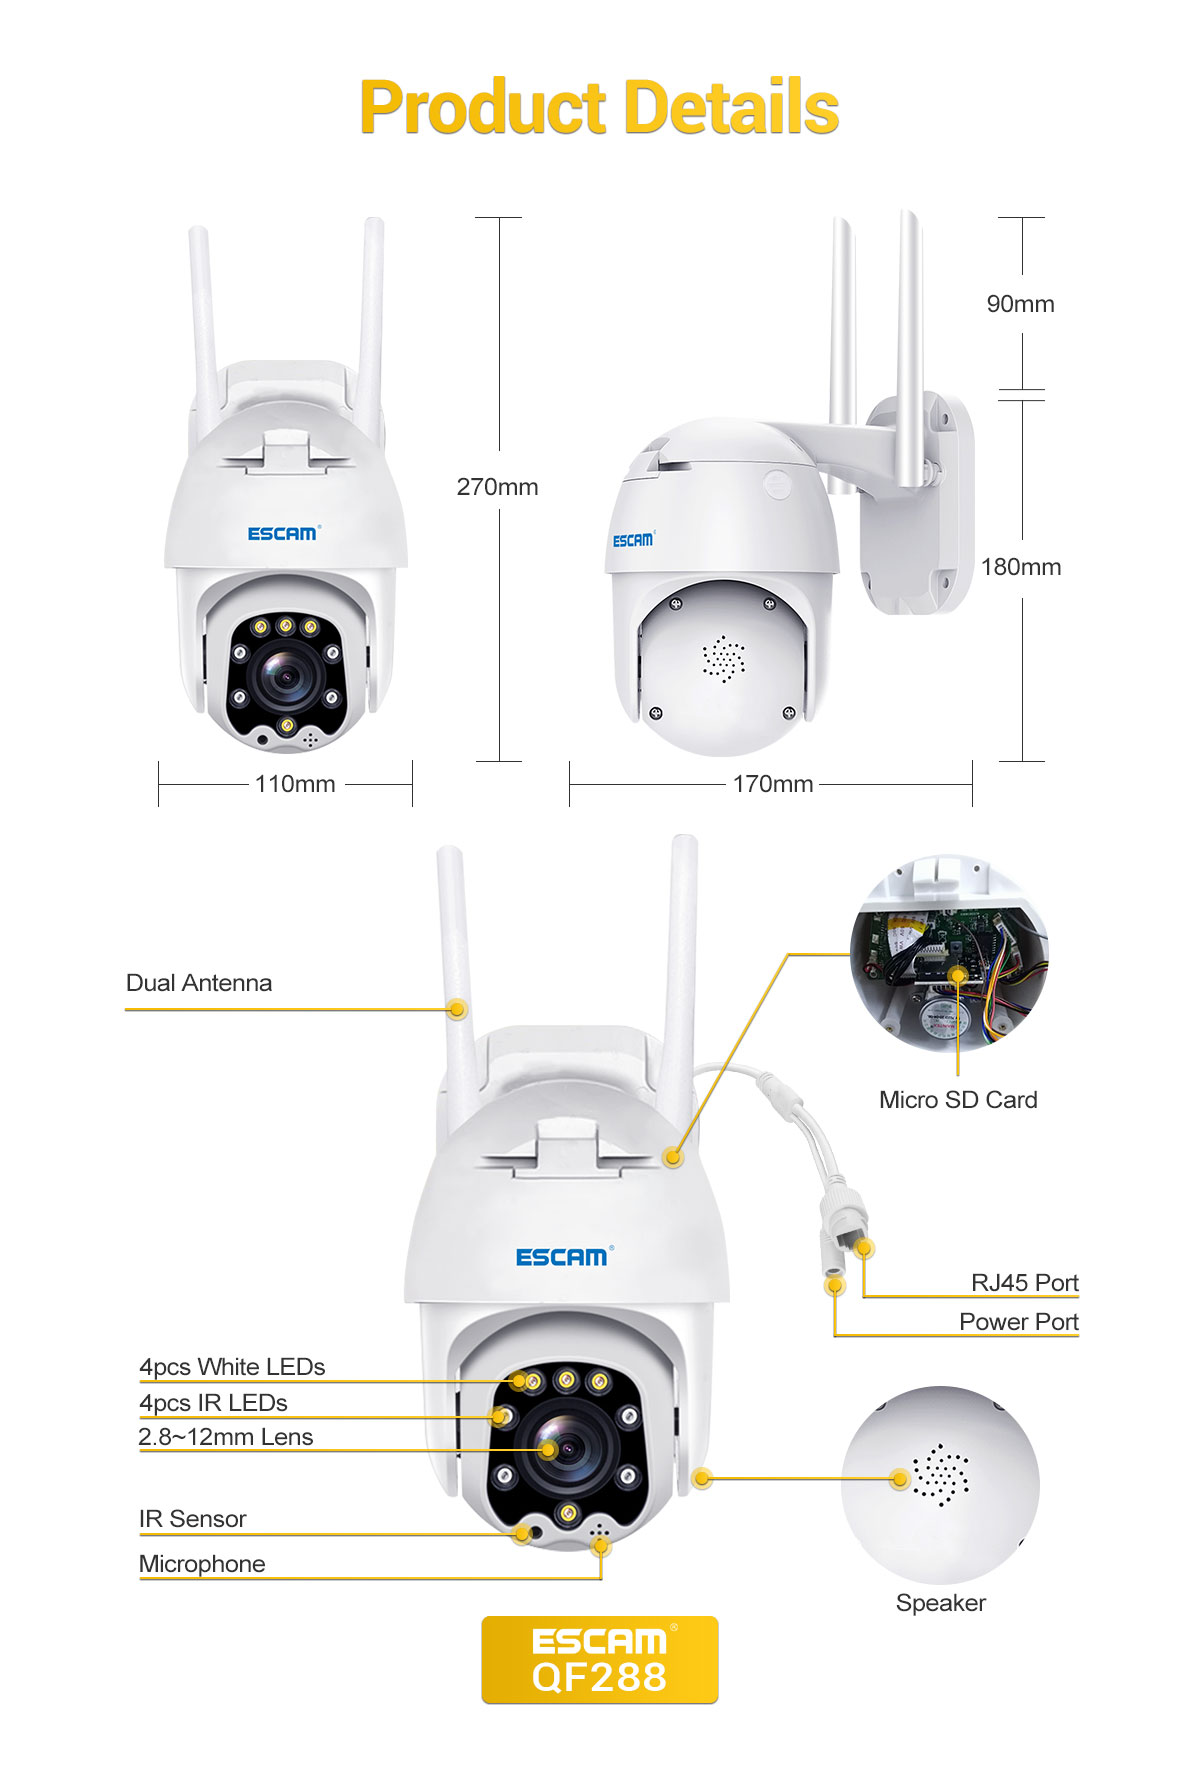 ESCAM-QF288-3MP-PanTilt-8X-Zoom-AI-Humanoid-detection-Cloud-Storage-Waterproof-WiFi-IP-Camera-with-T-1693500-13